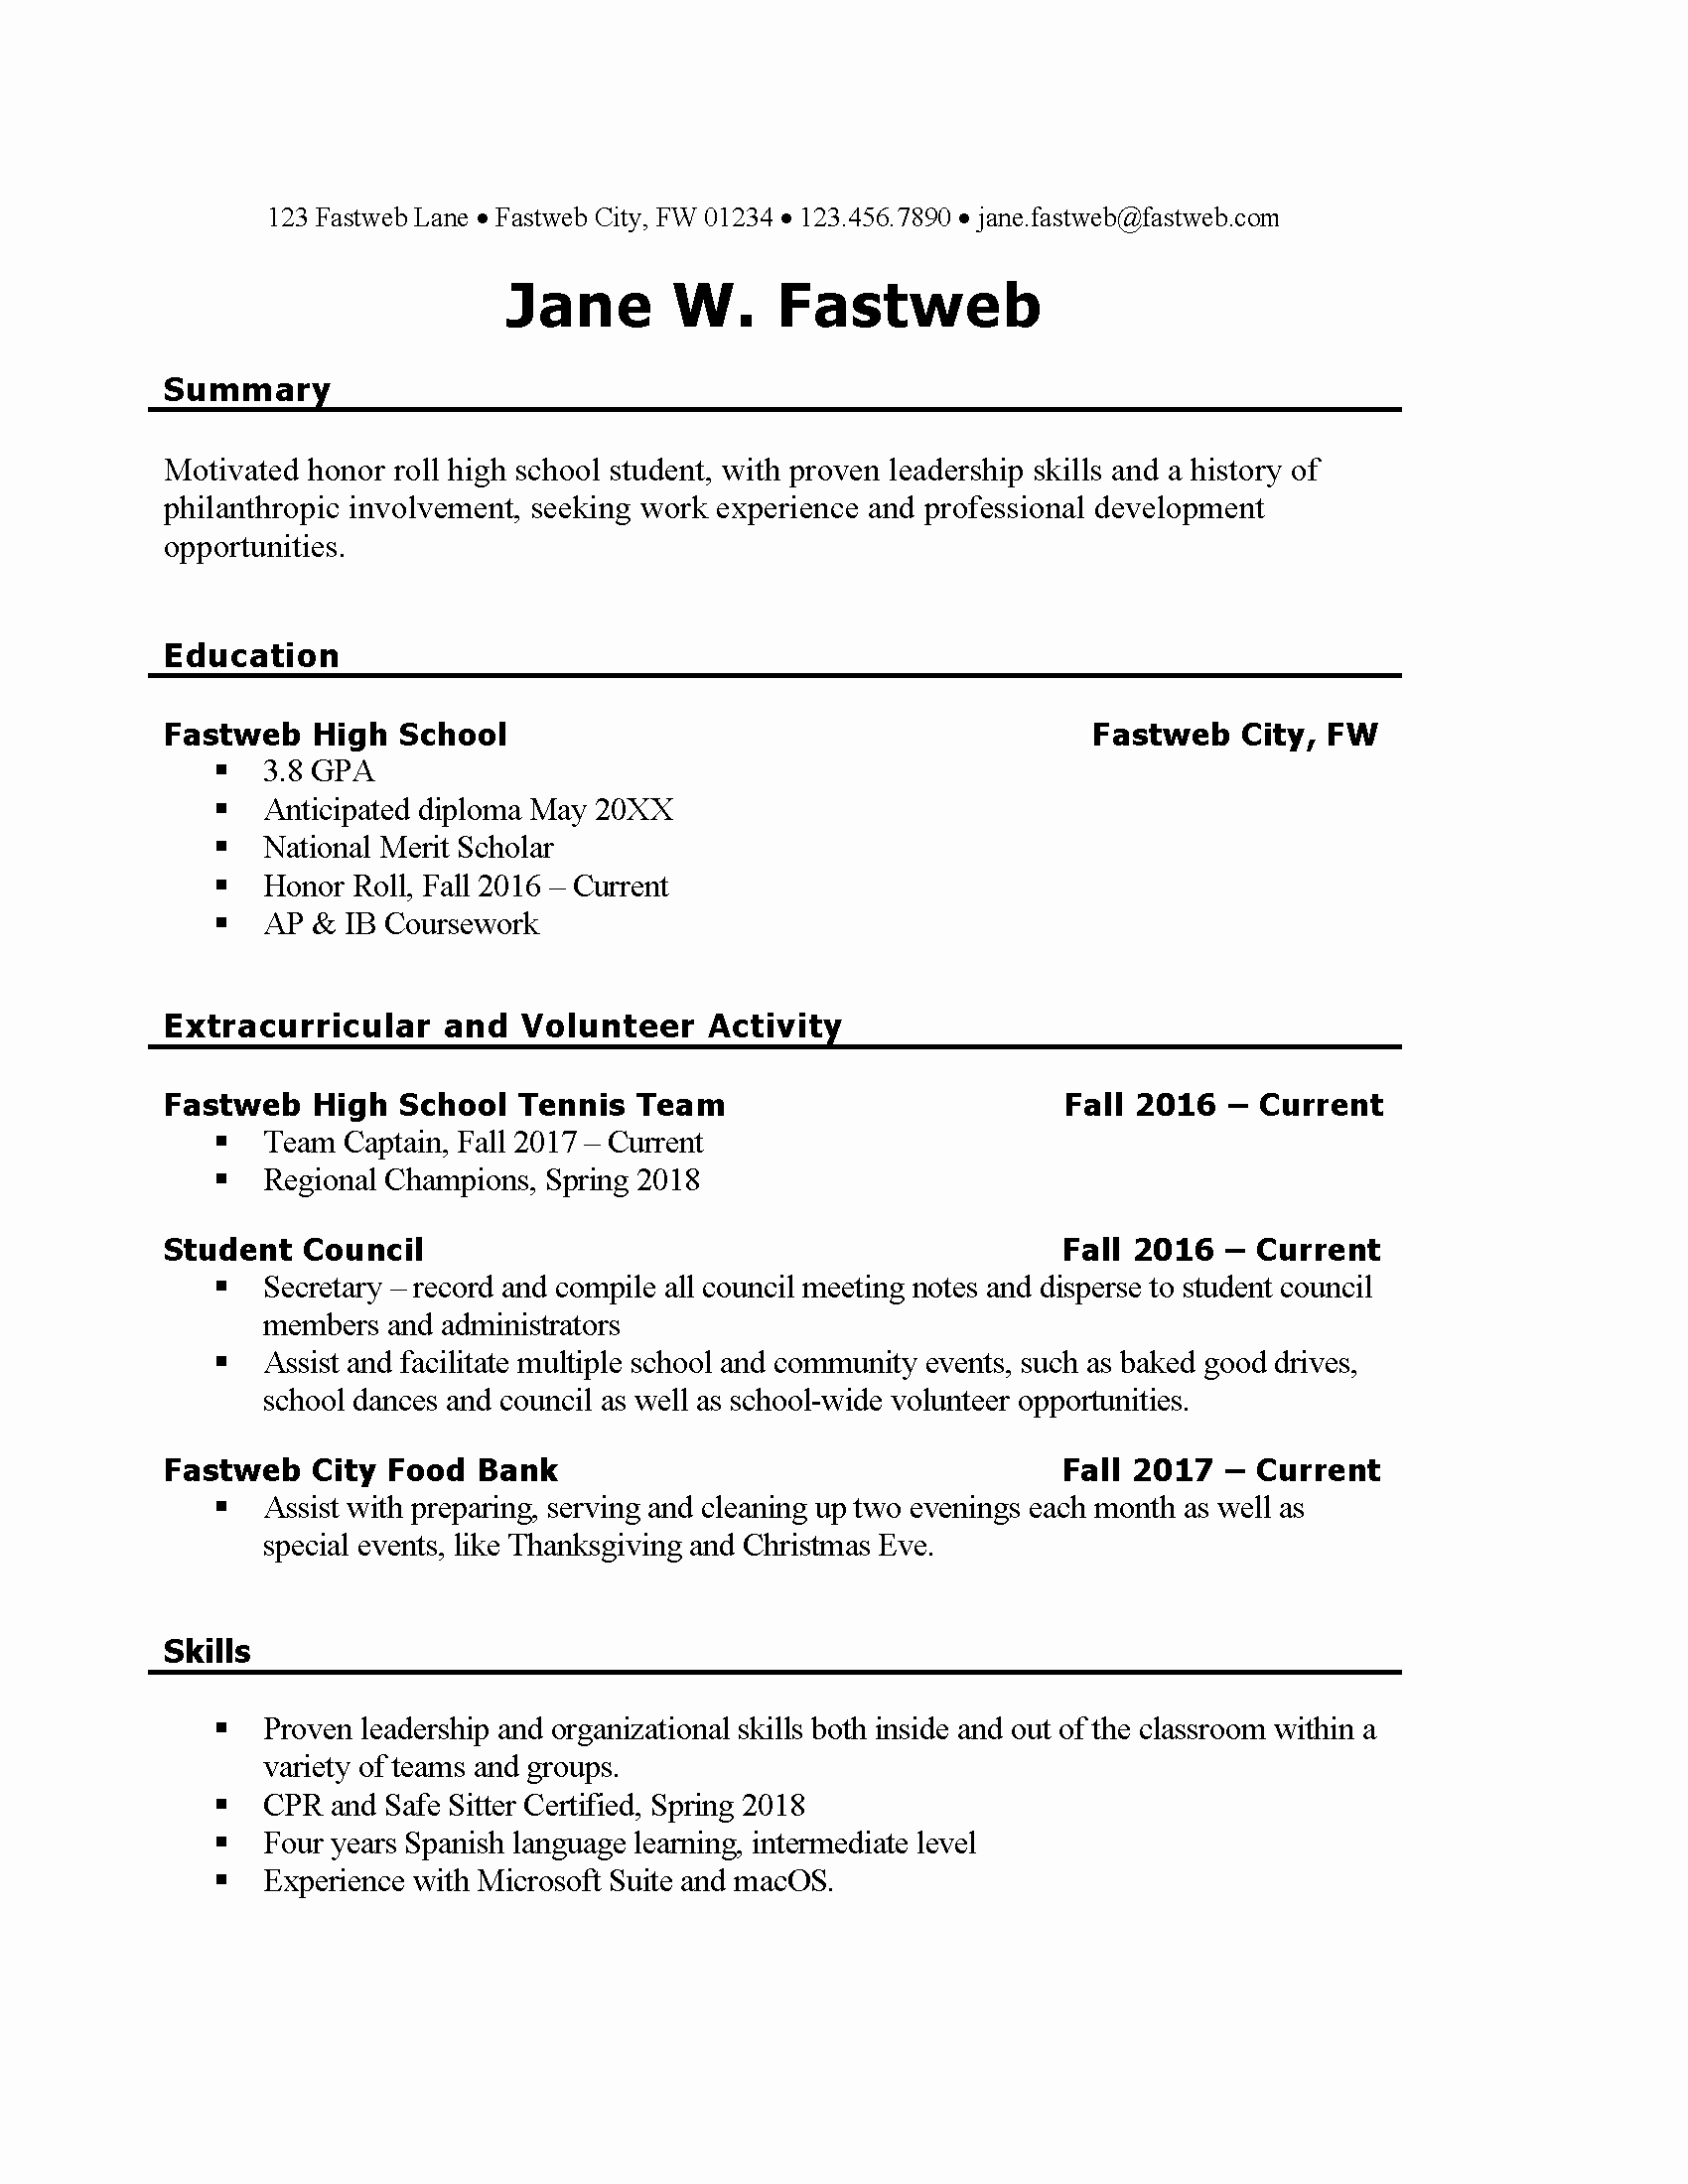 First Job Experience Essay Awesome Digital Design – 2 12 19